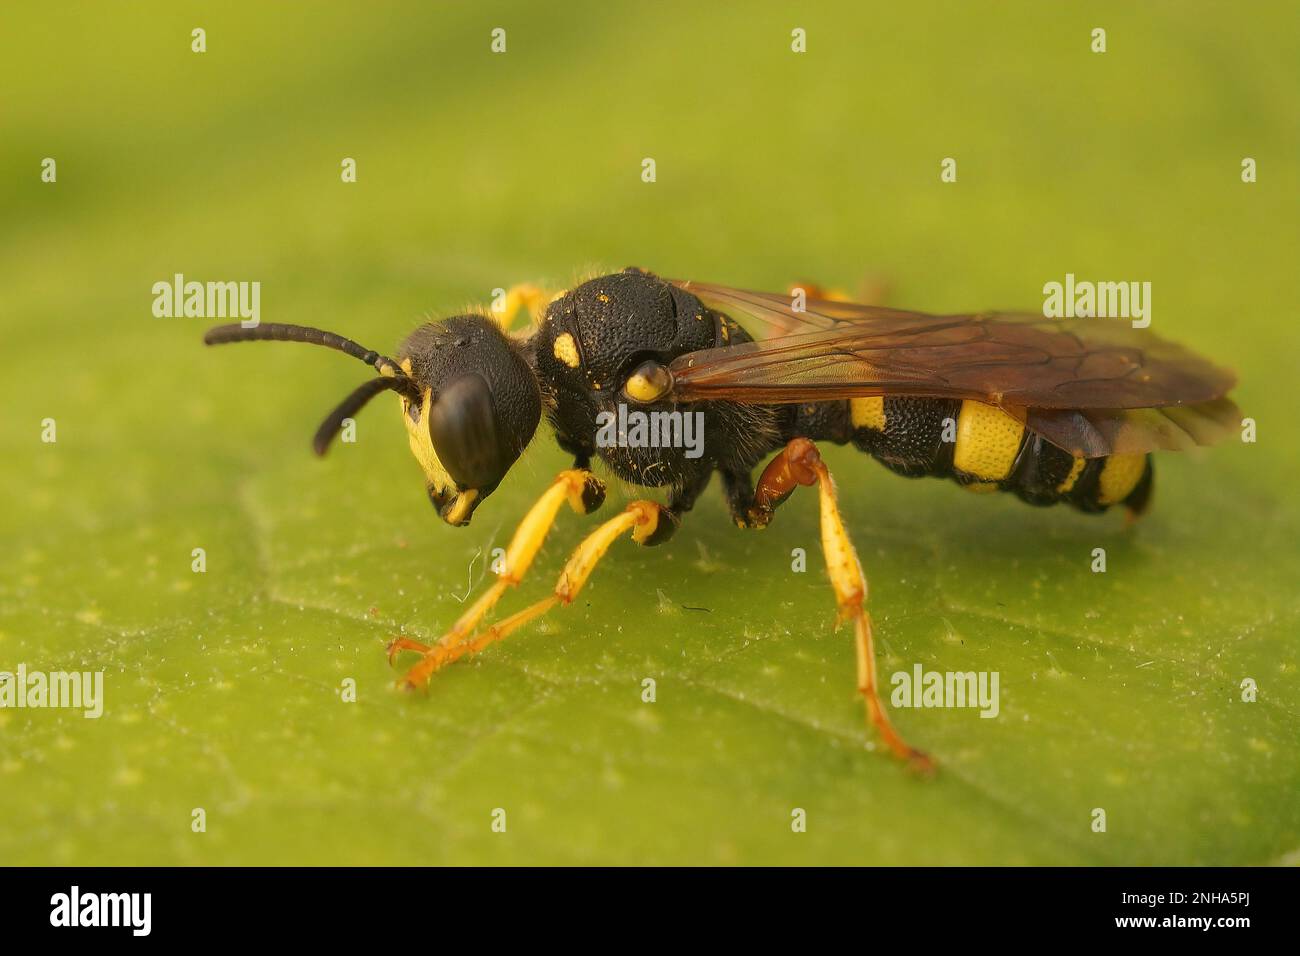 Closeup on a ornate tailed digger wasp, Cerceris rybyensis sitting on a green leaf in the garden Stock Photo